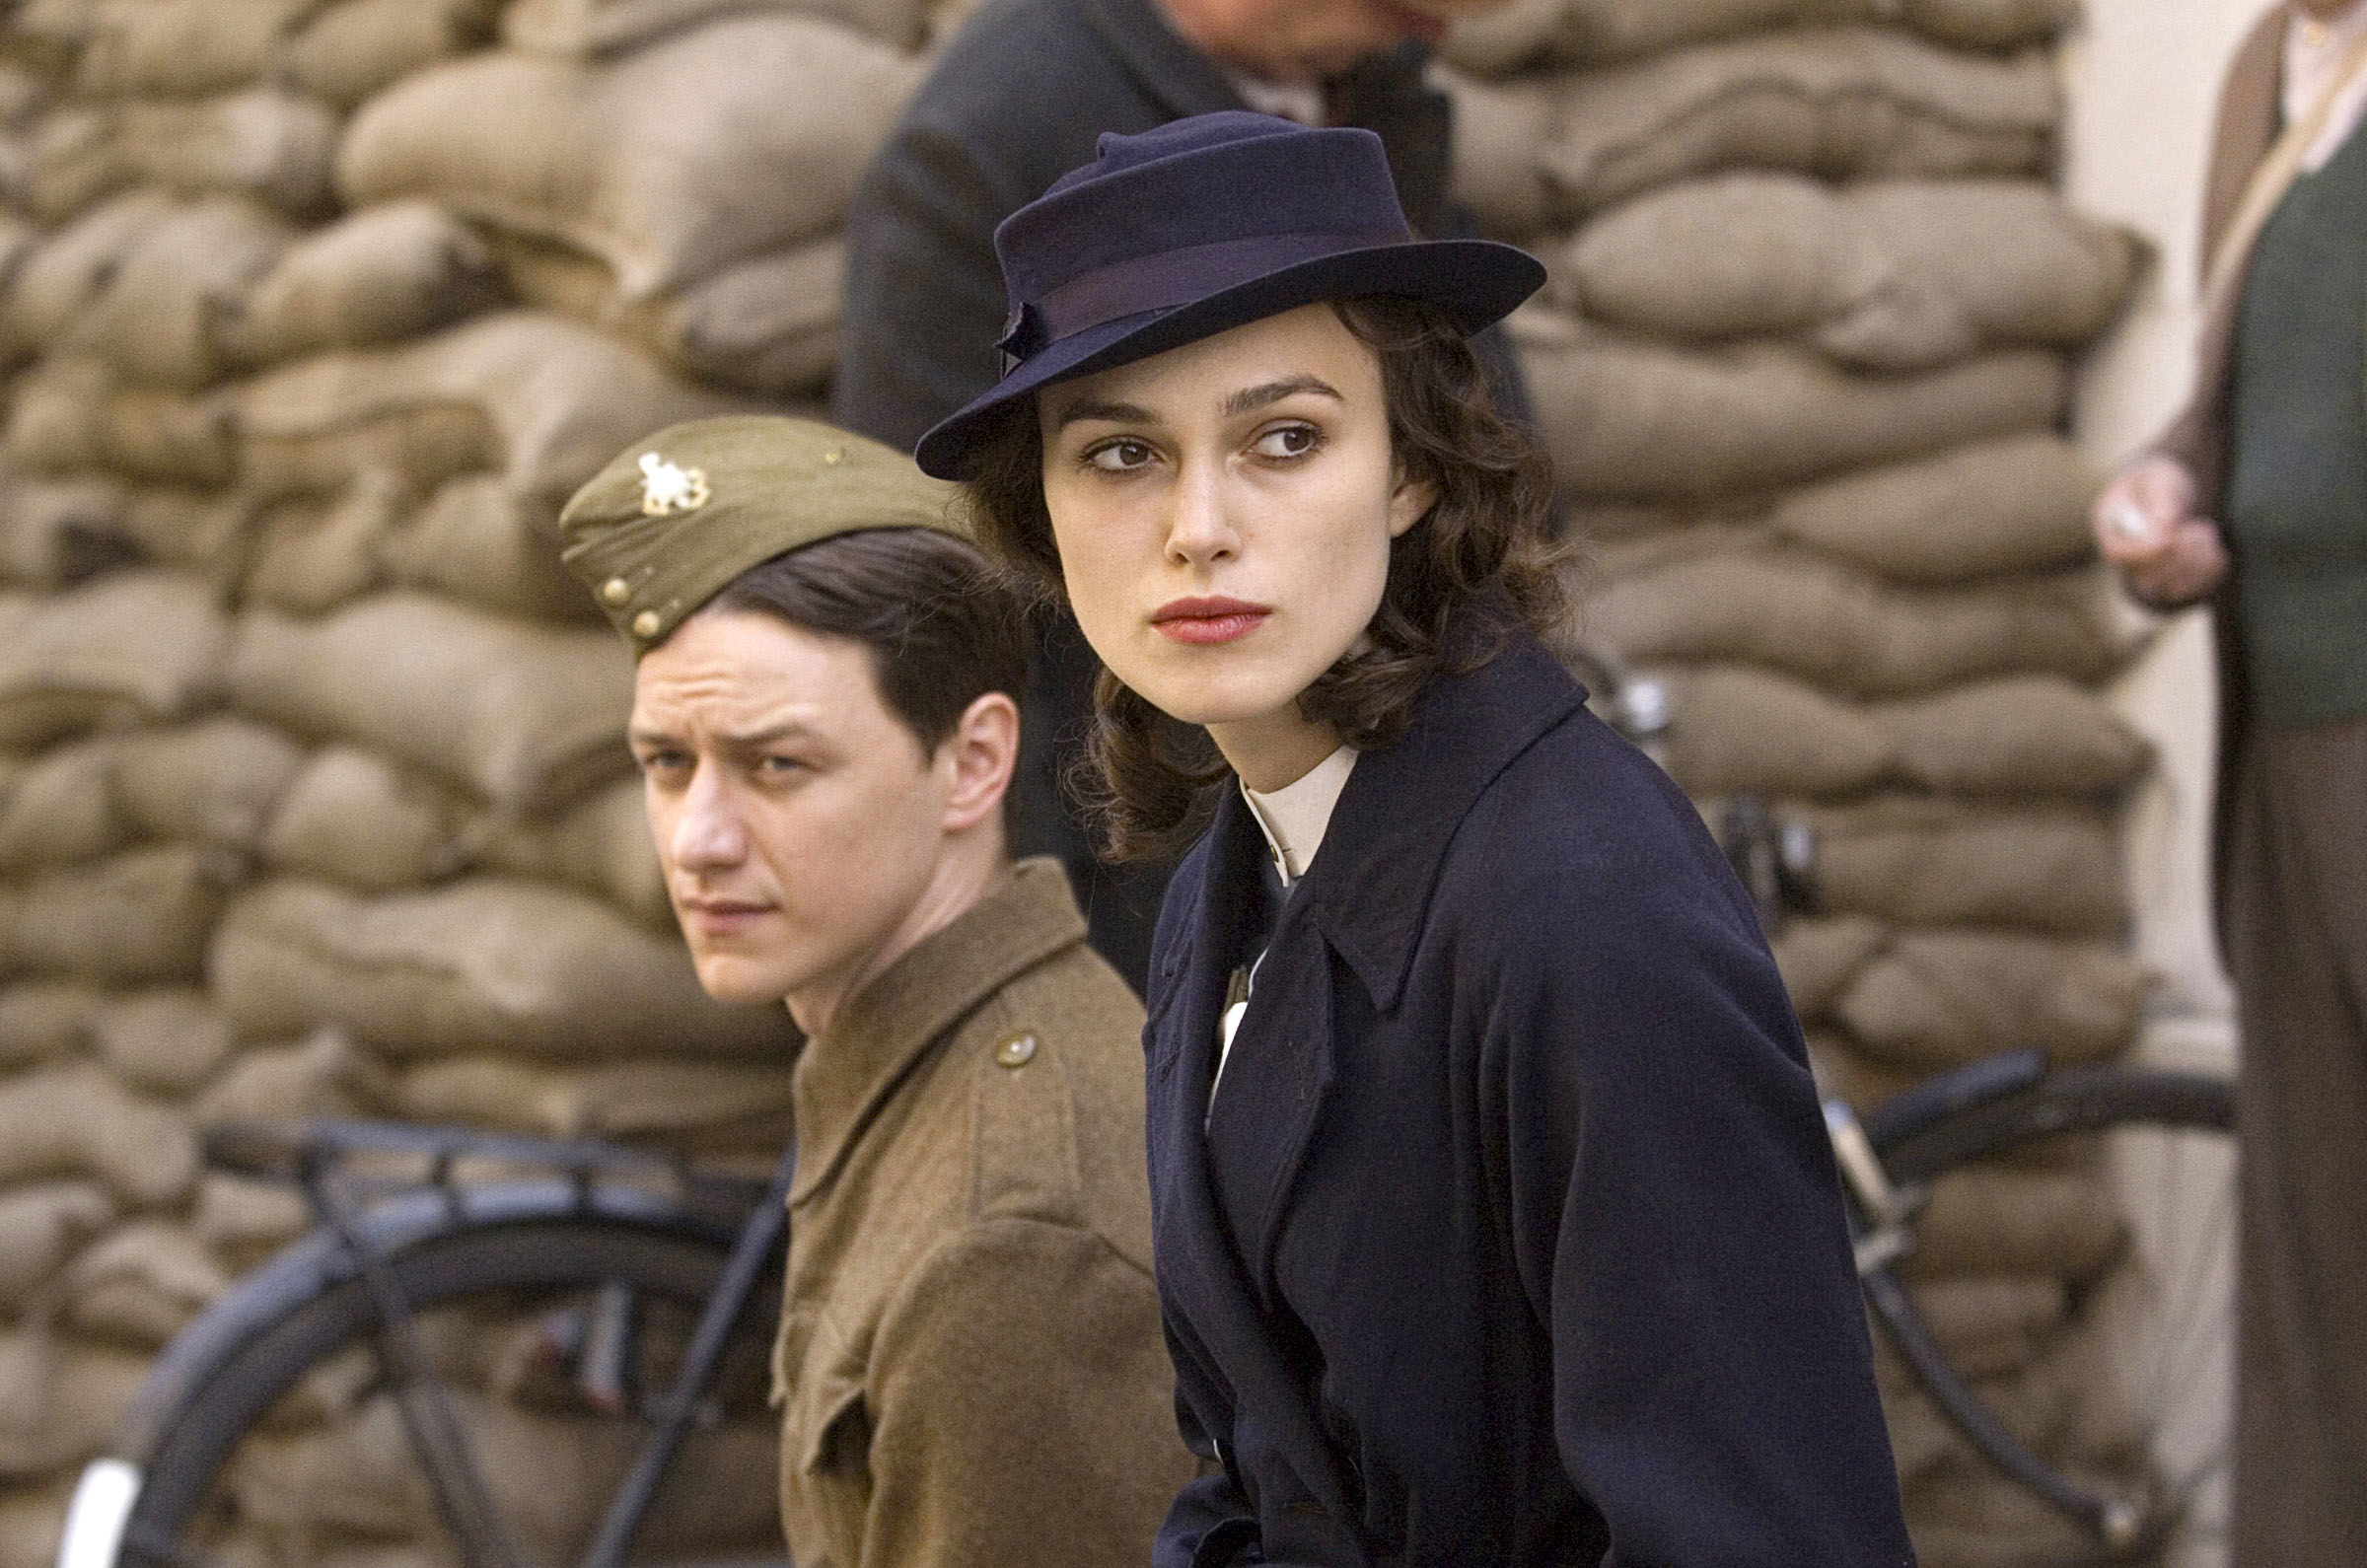 James McAvoy as a soldier and Keira Knightley in 1930s clothing